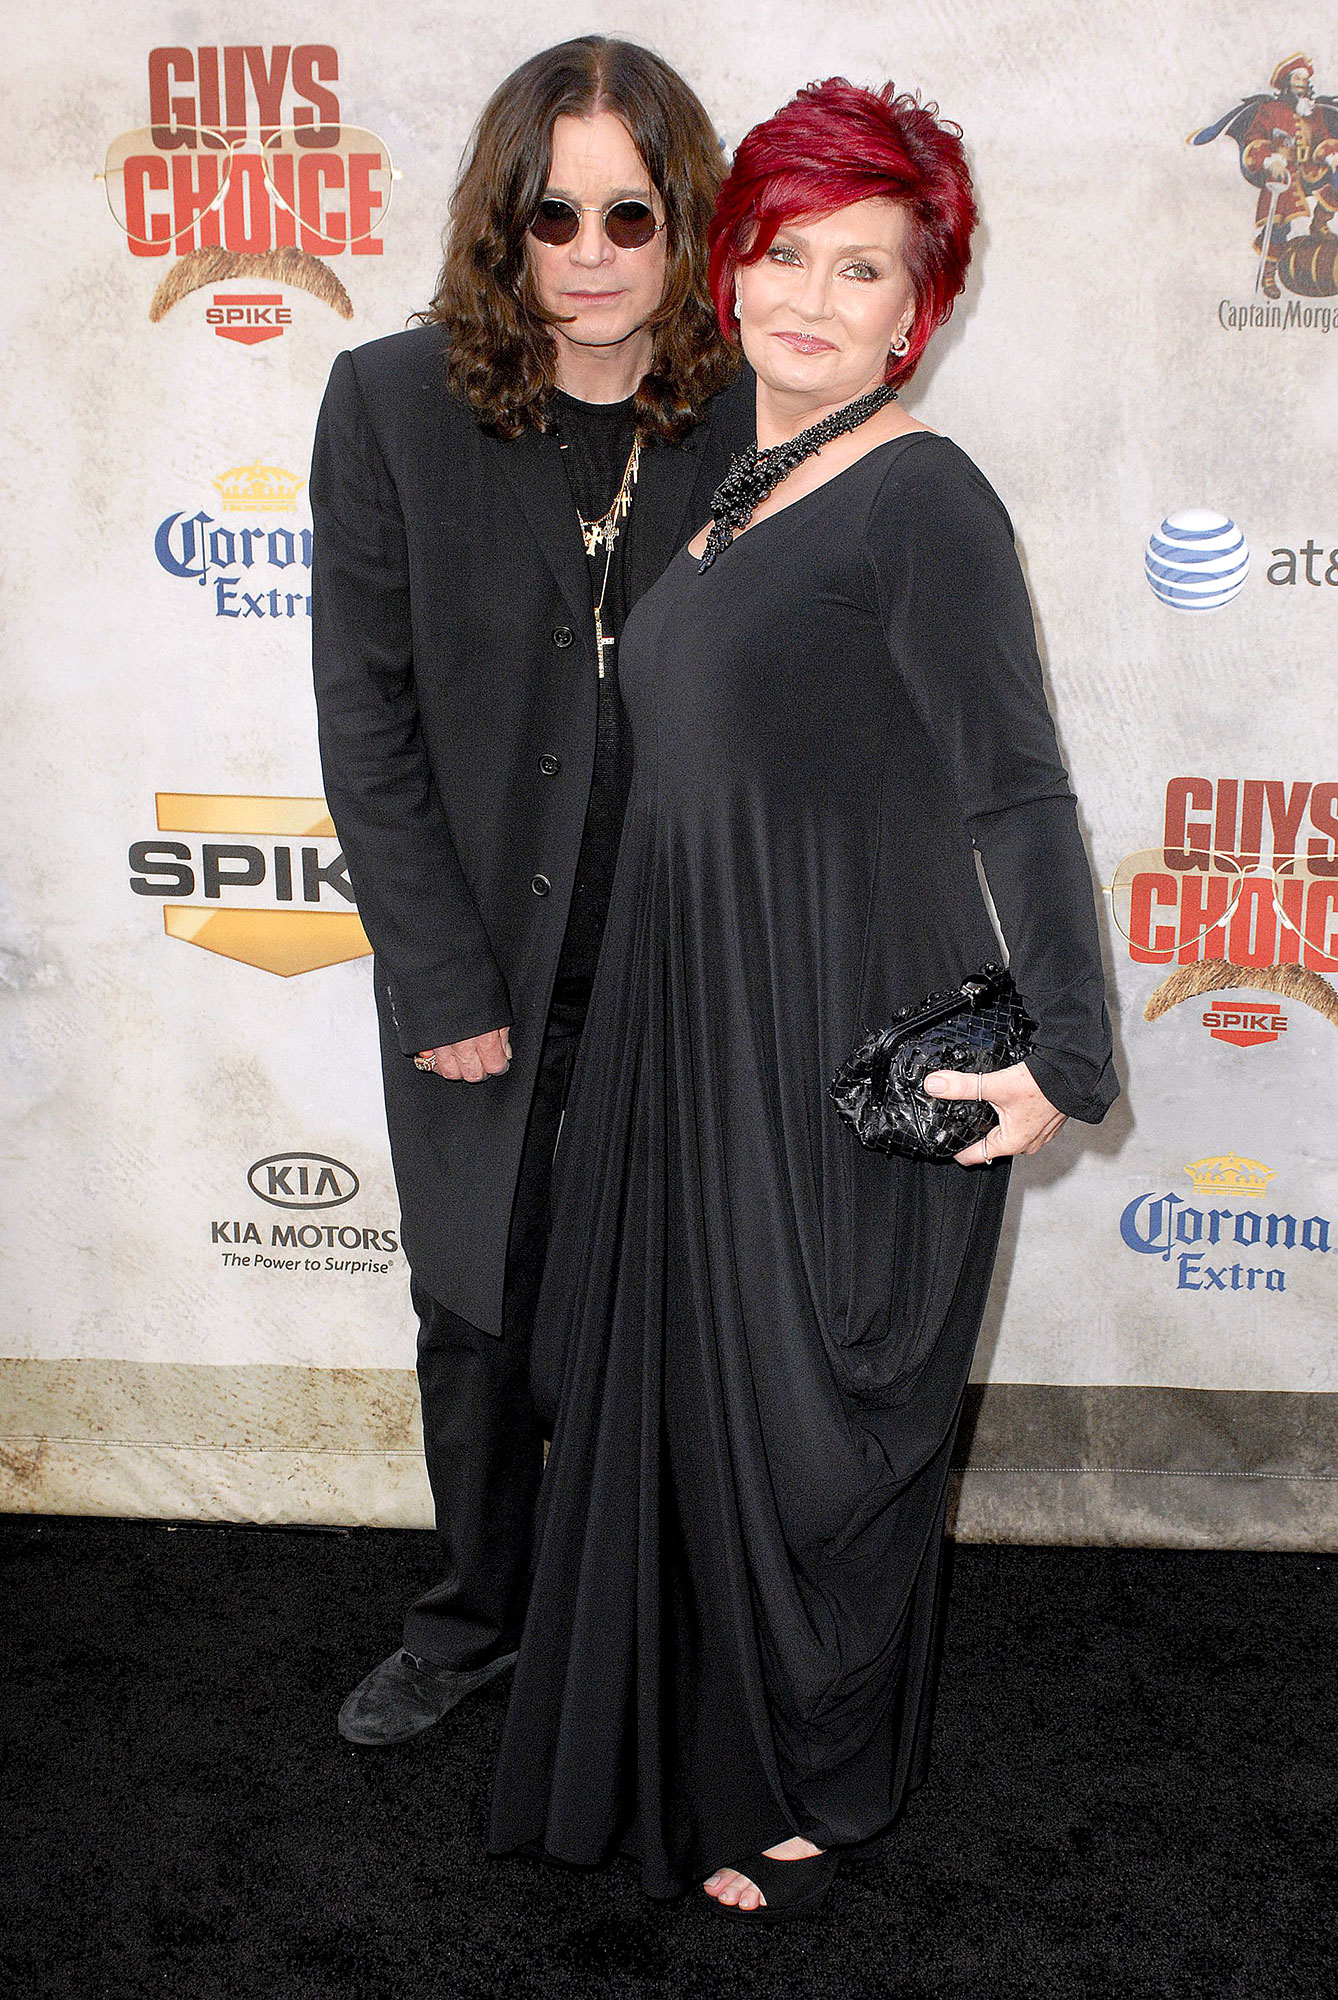 Divorce Rumors Ozzy and Sharon Osbourne A Timeline of Their Relationship